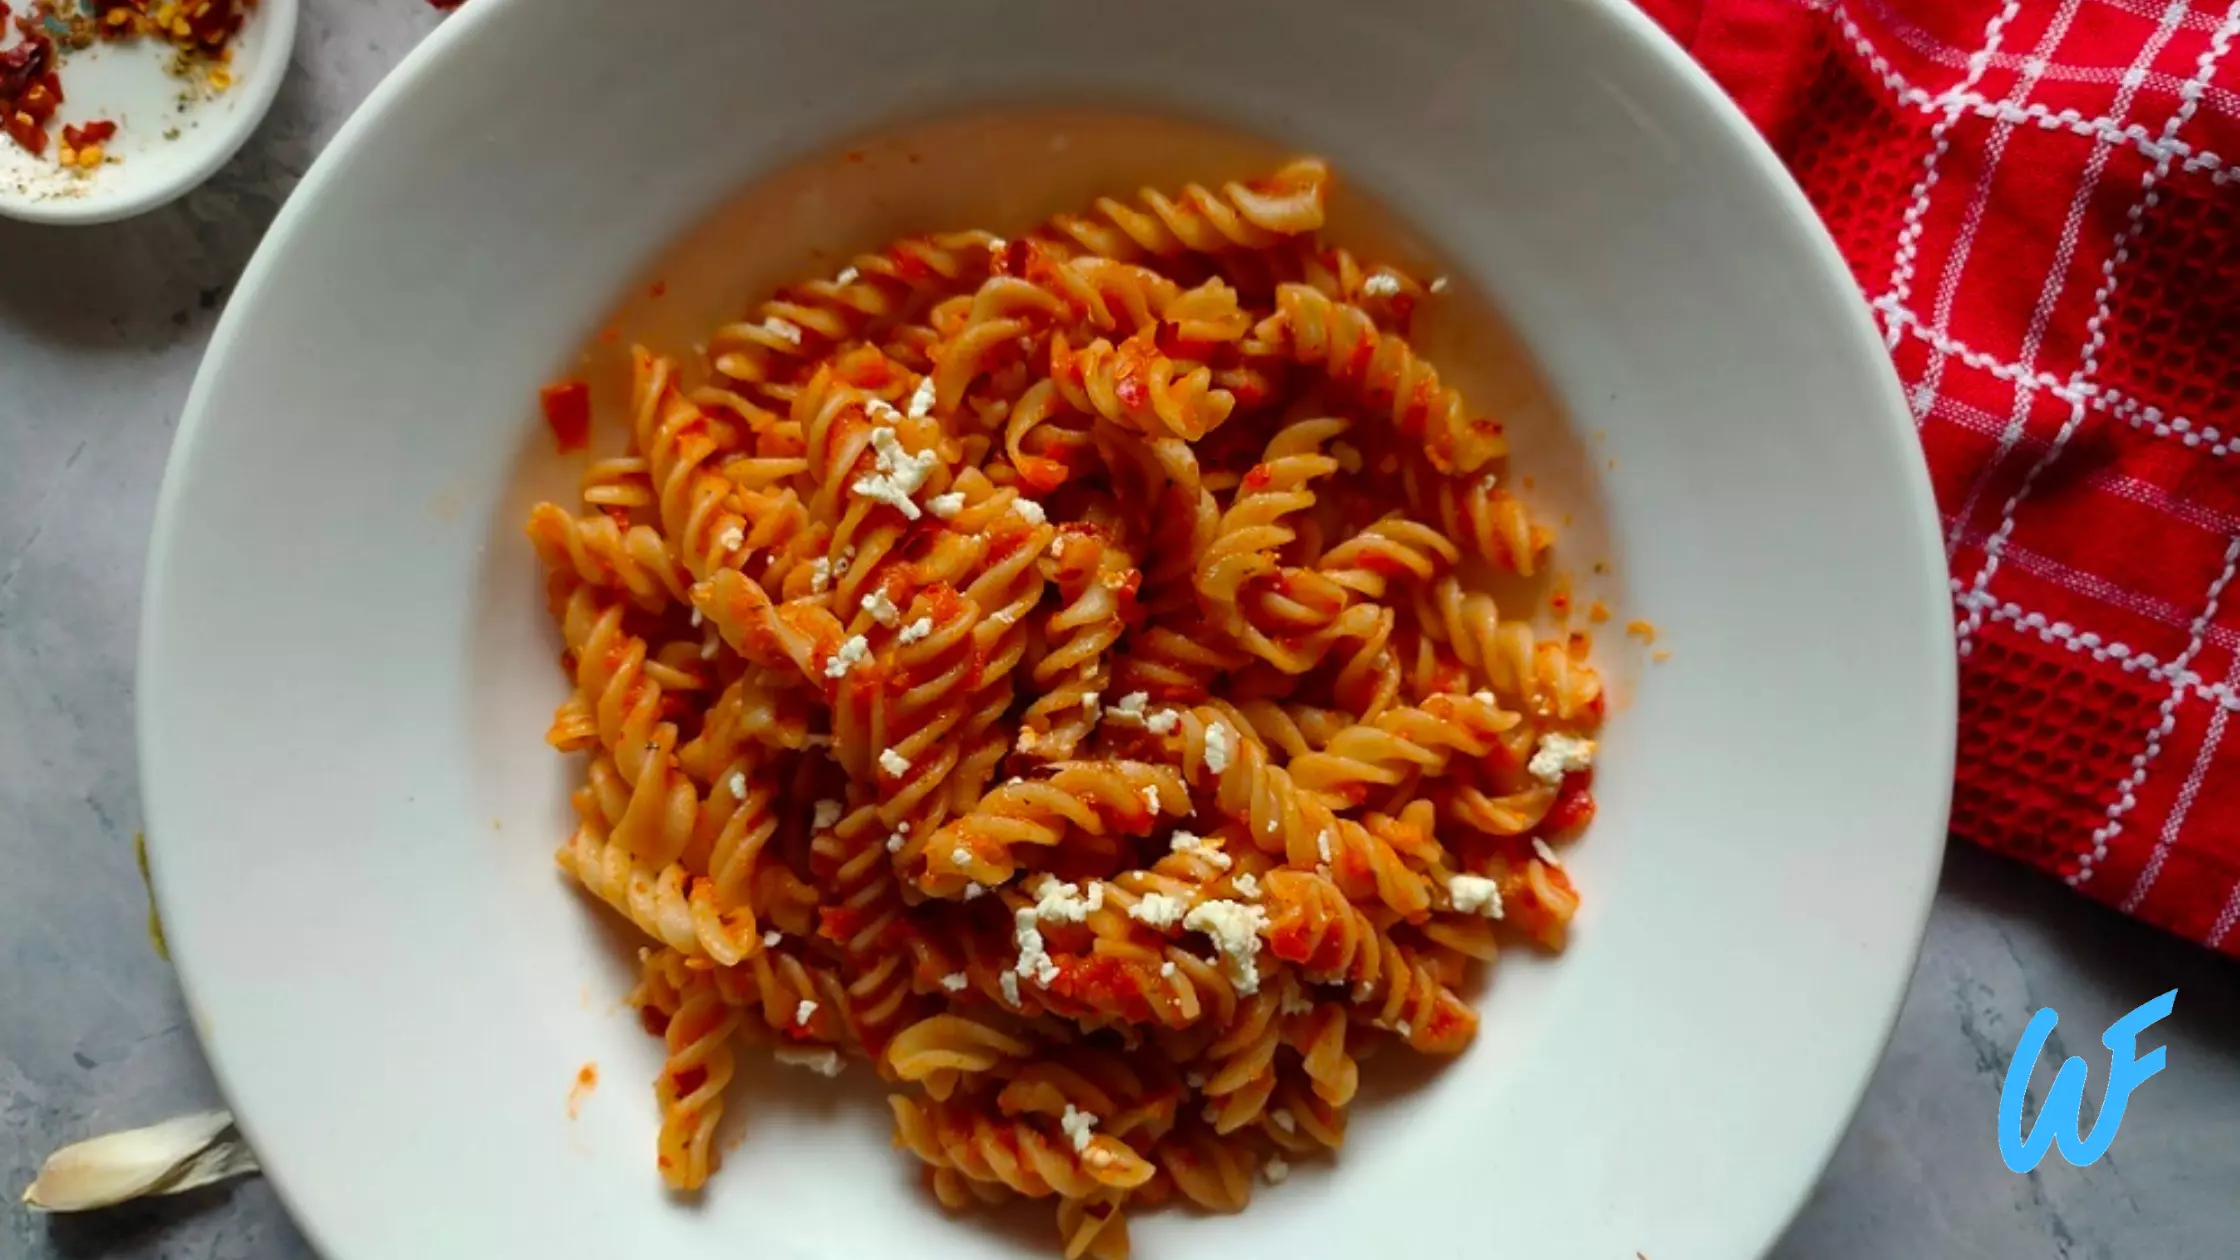 You are currently viewing Gluten-Free Pasta with Tomato Sauce Recipe